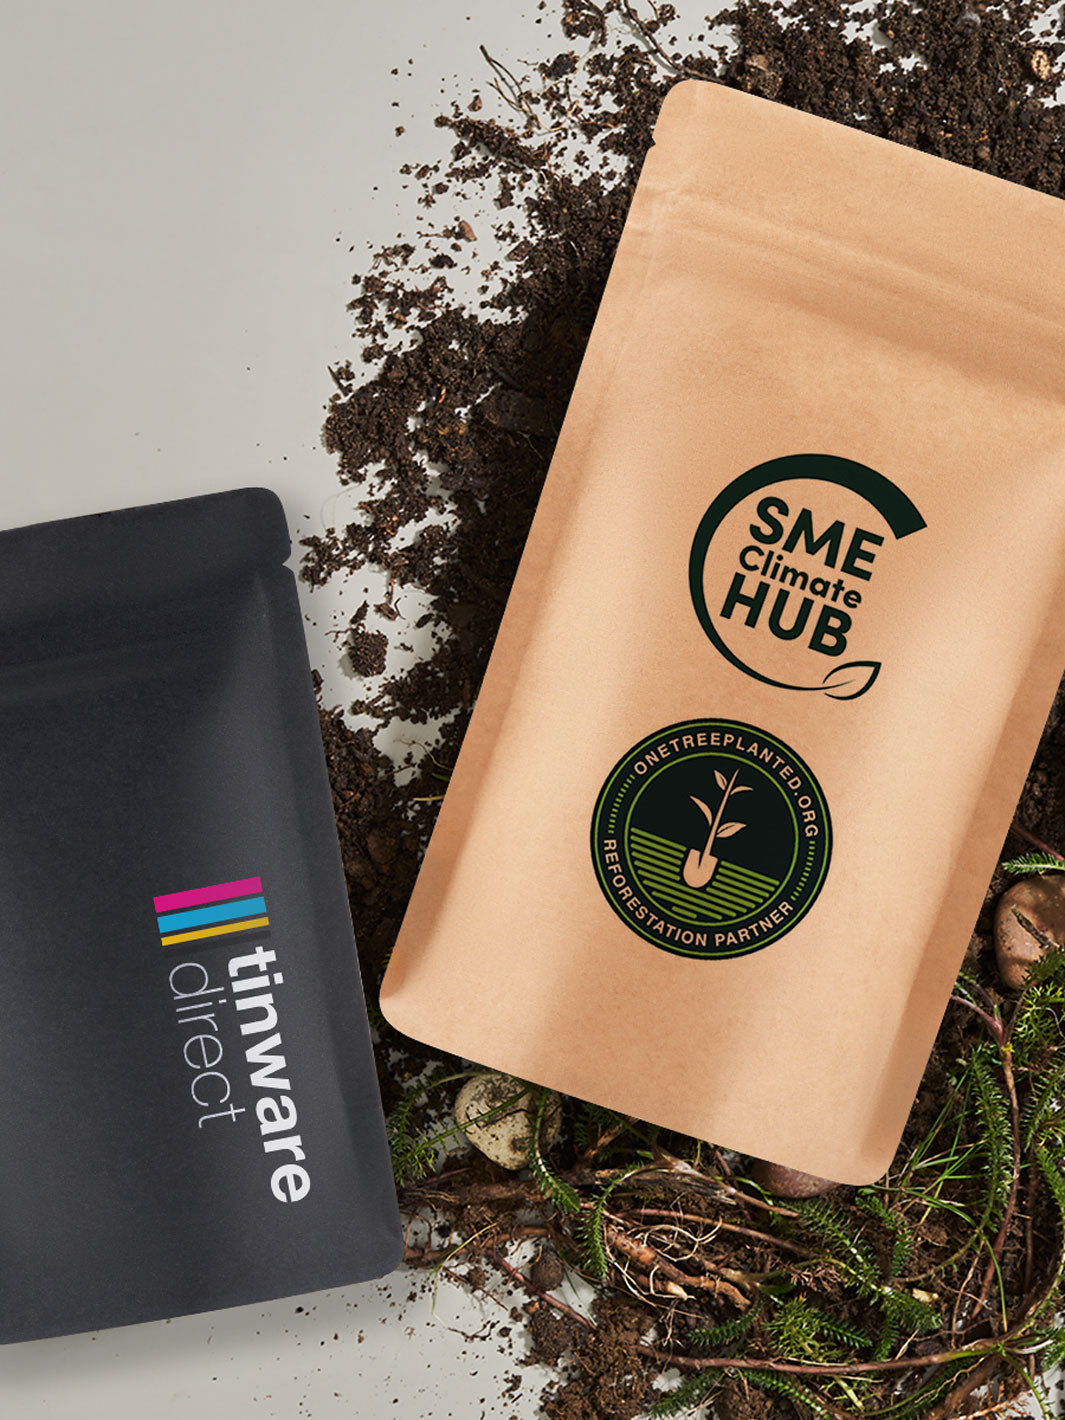 Home compostable stand up pouch packaging with official labeling resting on soil. 